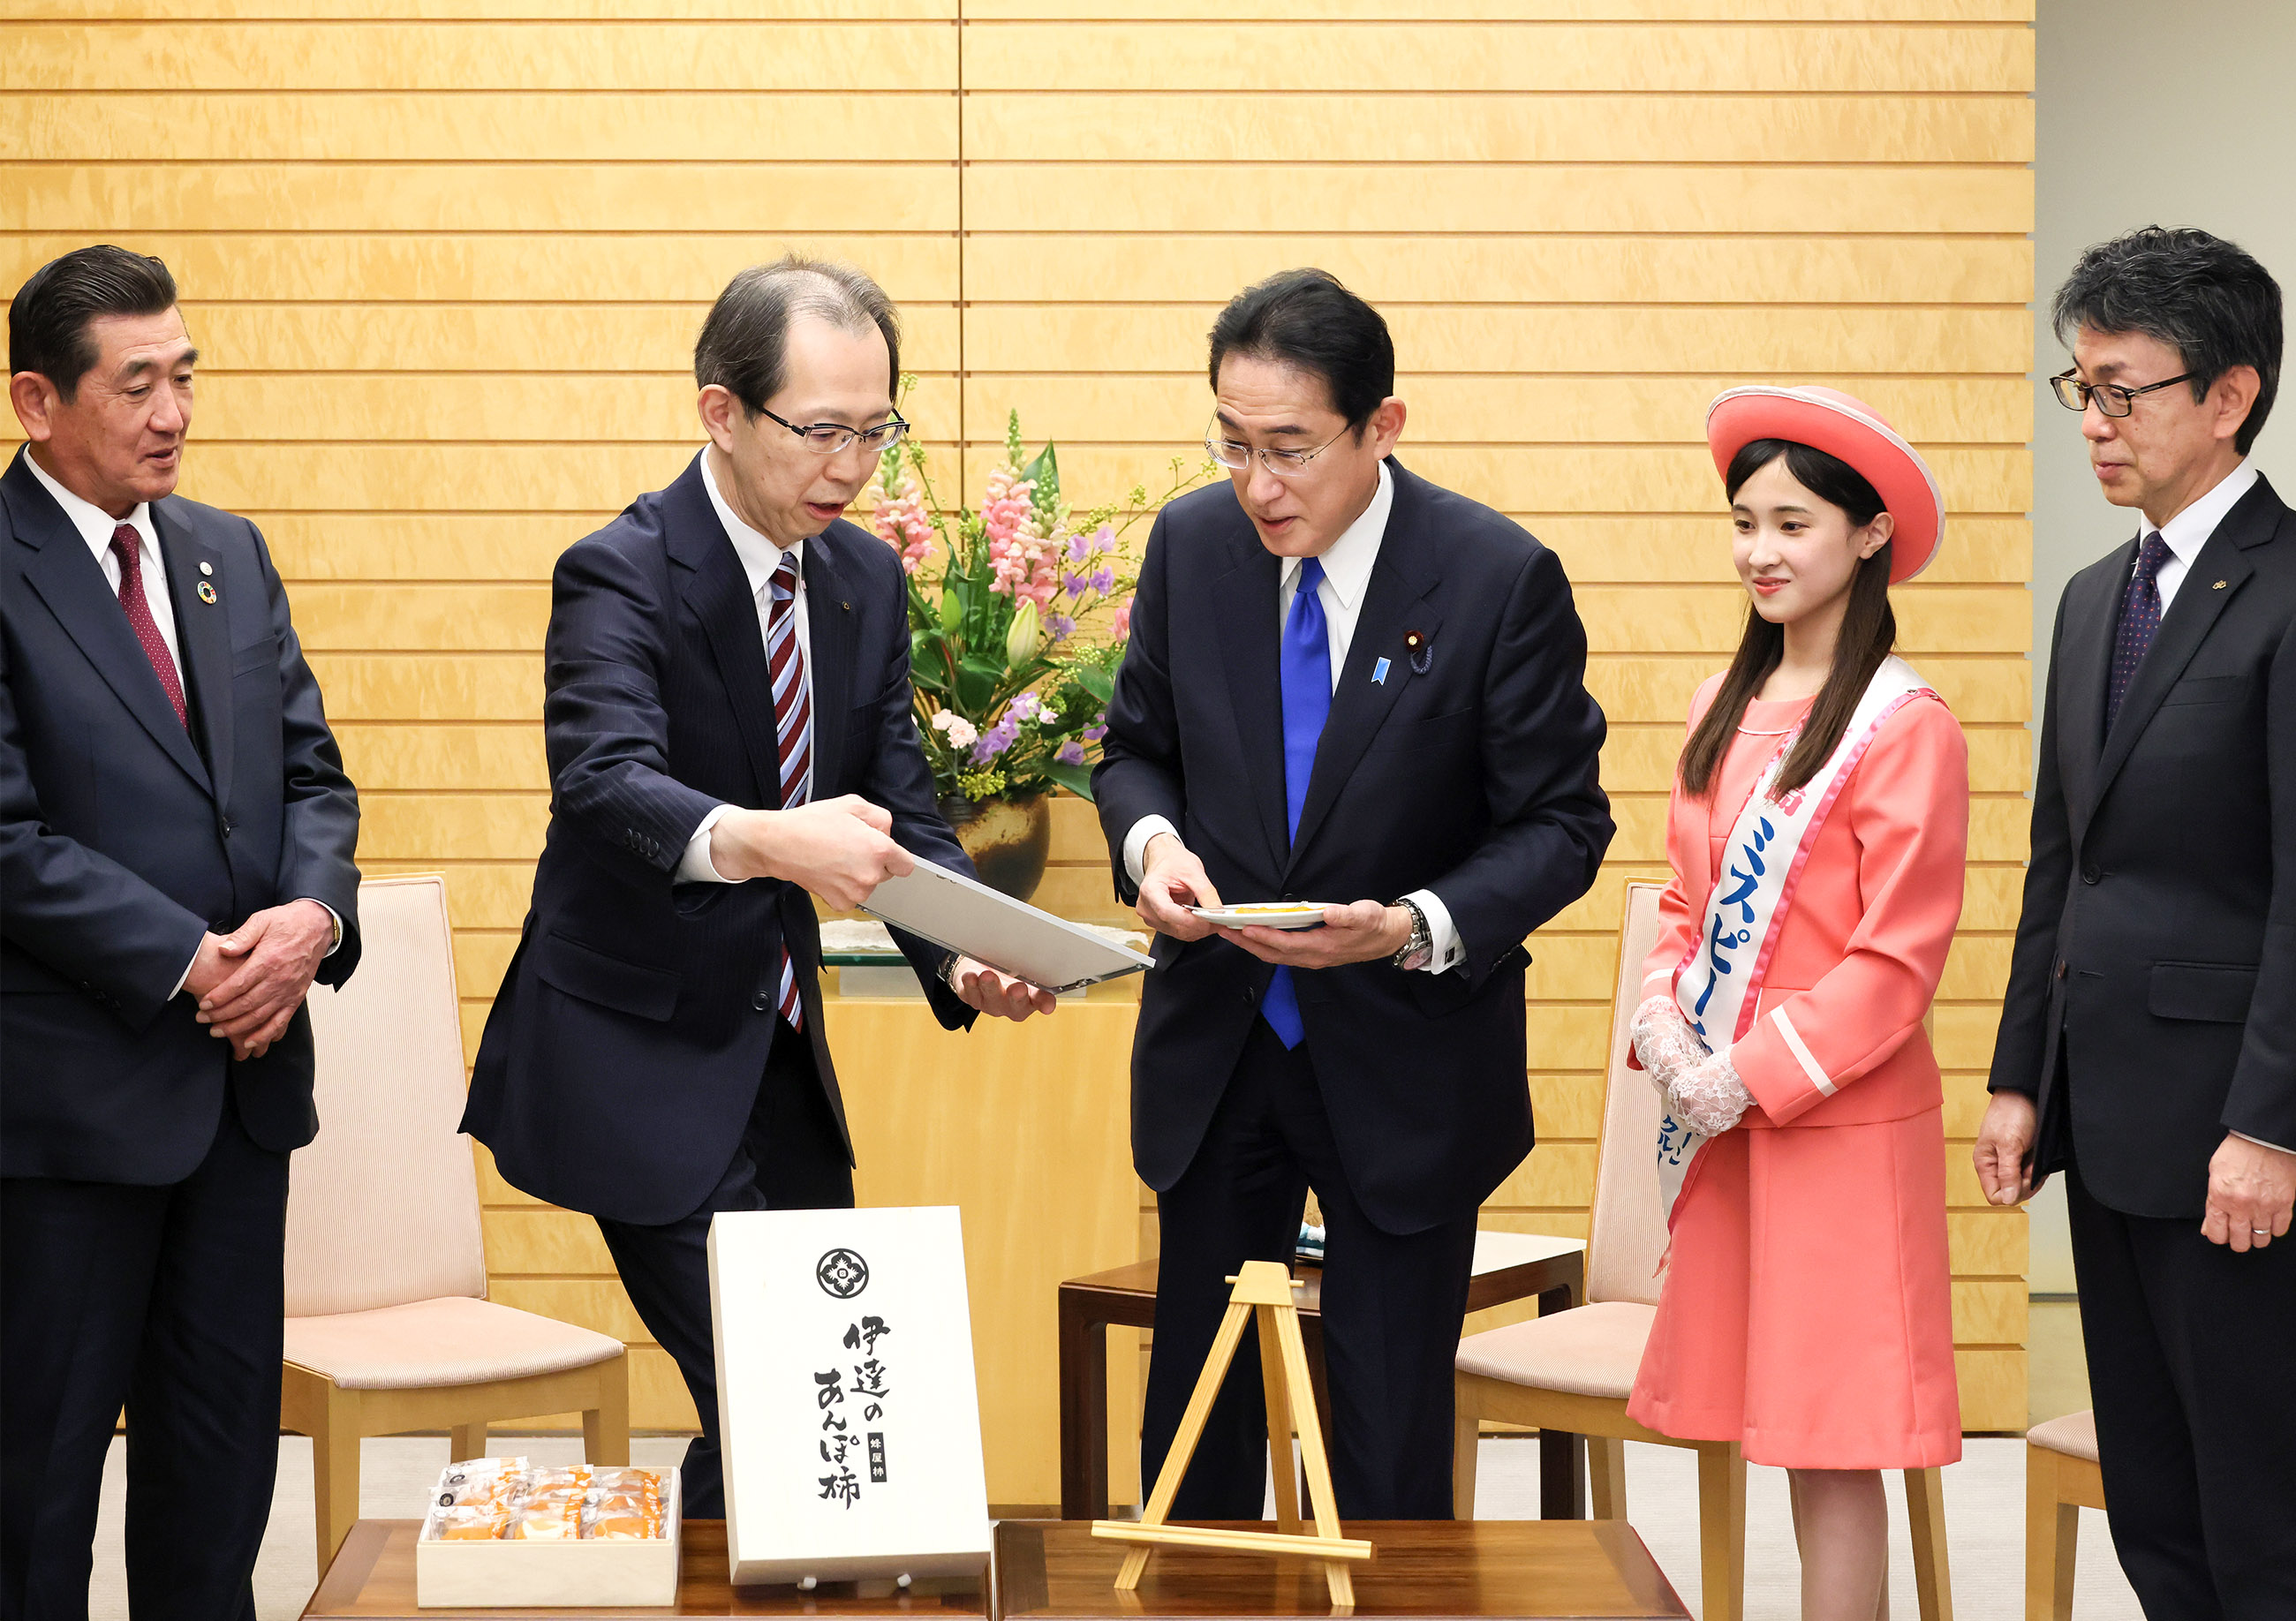 Prime Minister Kishida being presented with Anpo persimmons and receiving a courtesy call (4)